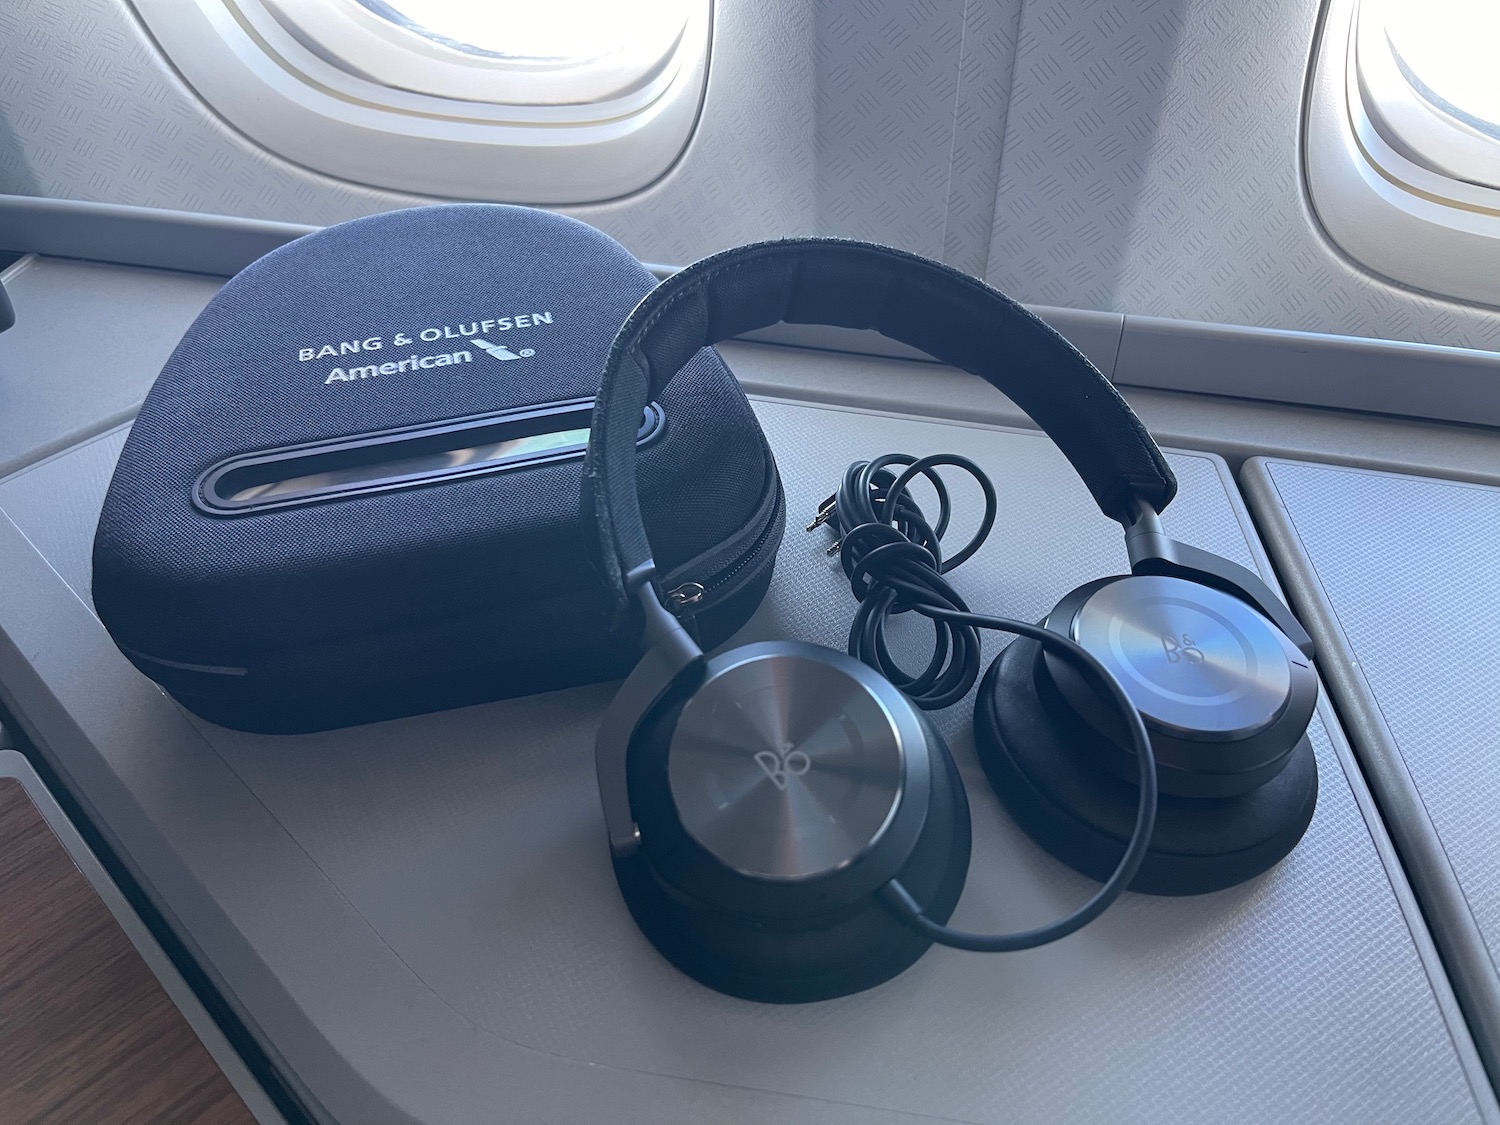 a pair of headphones on a plane